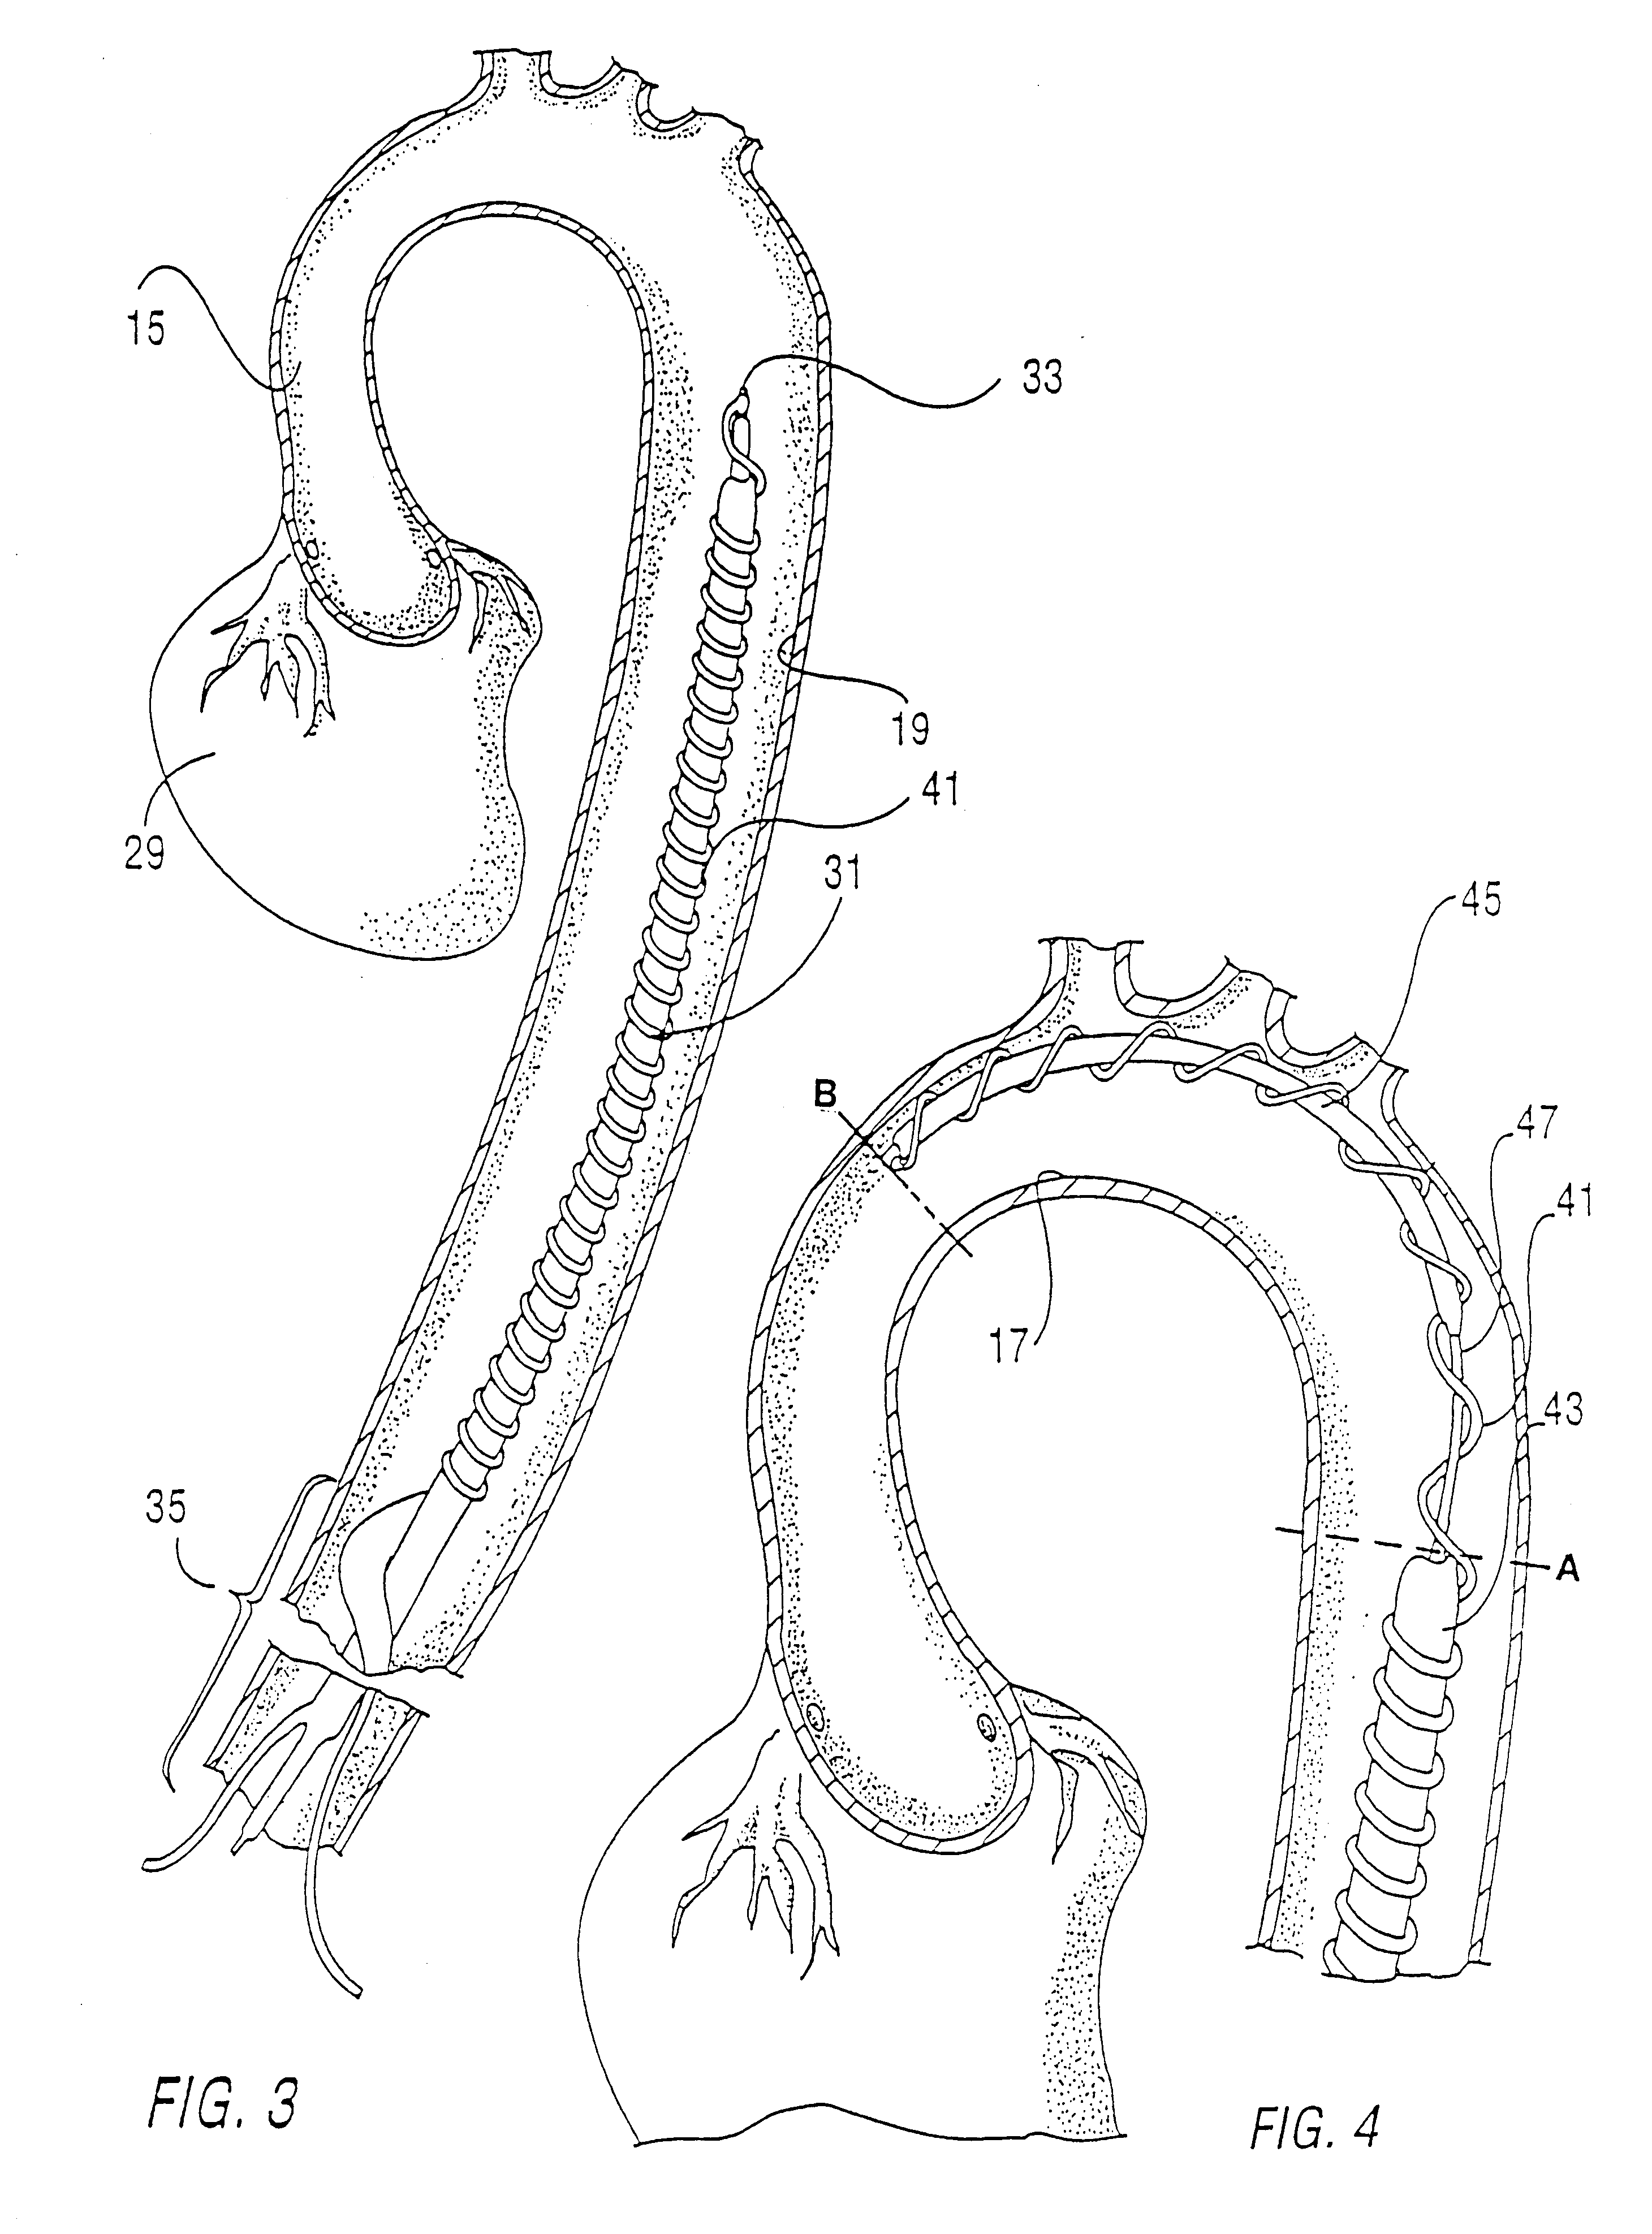 Removable left ventricular assist device with an aortic support apparatus